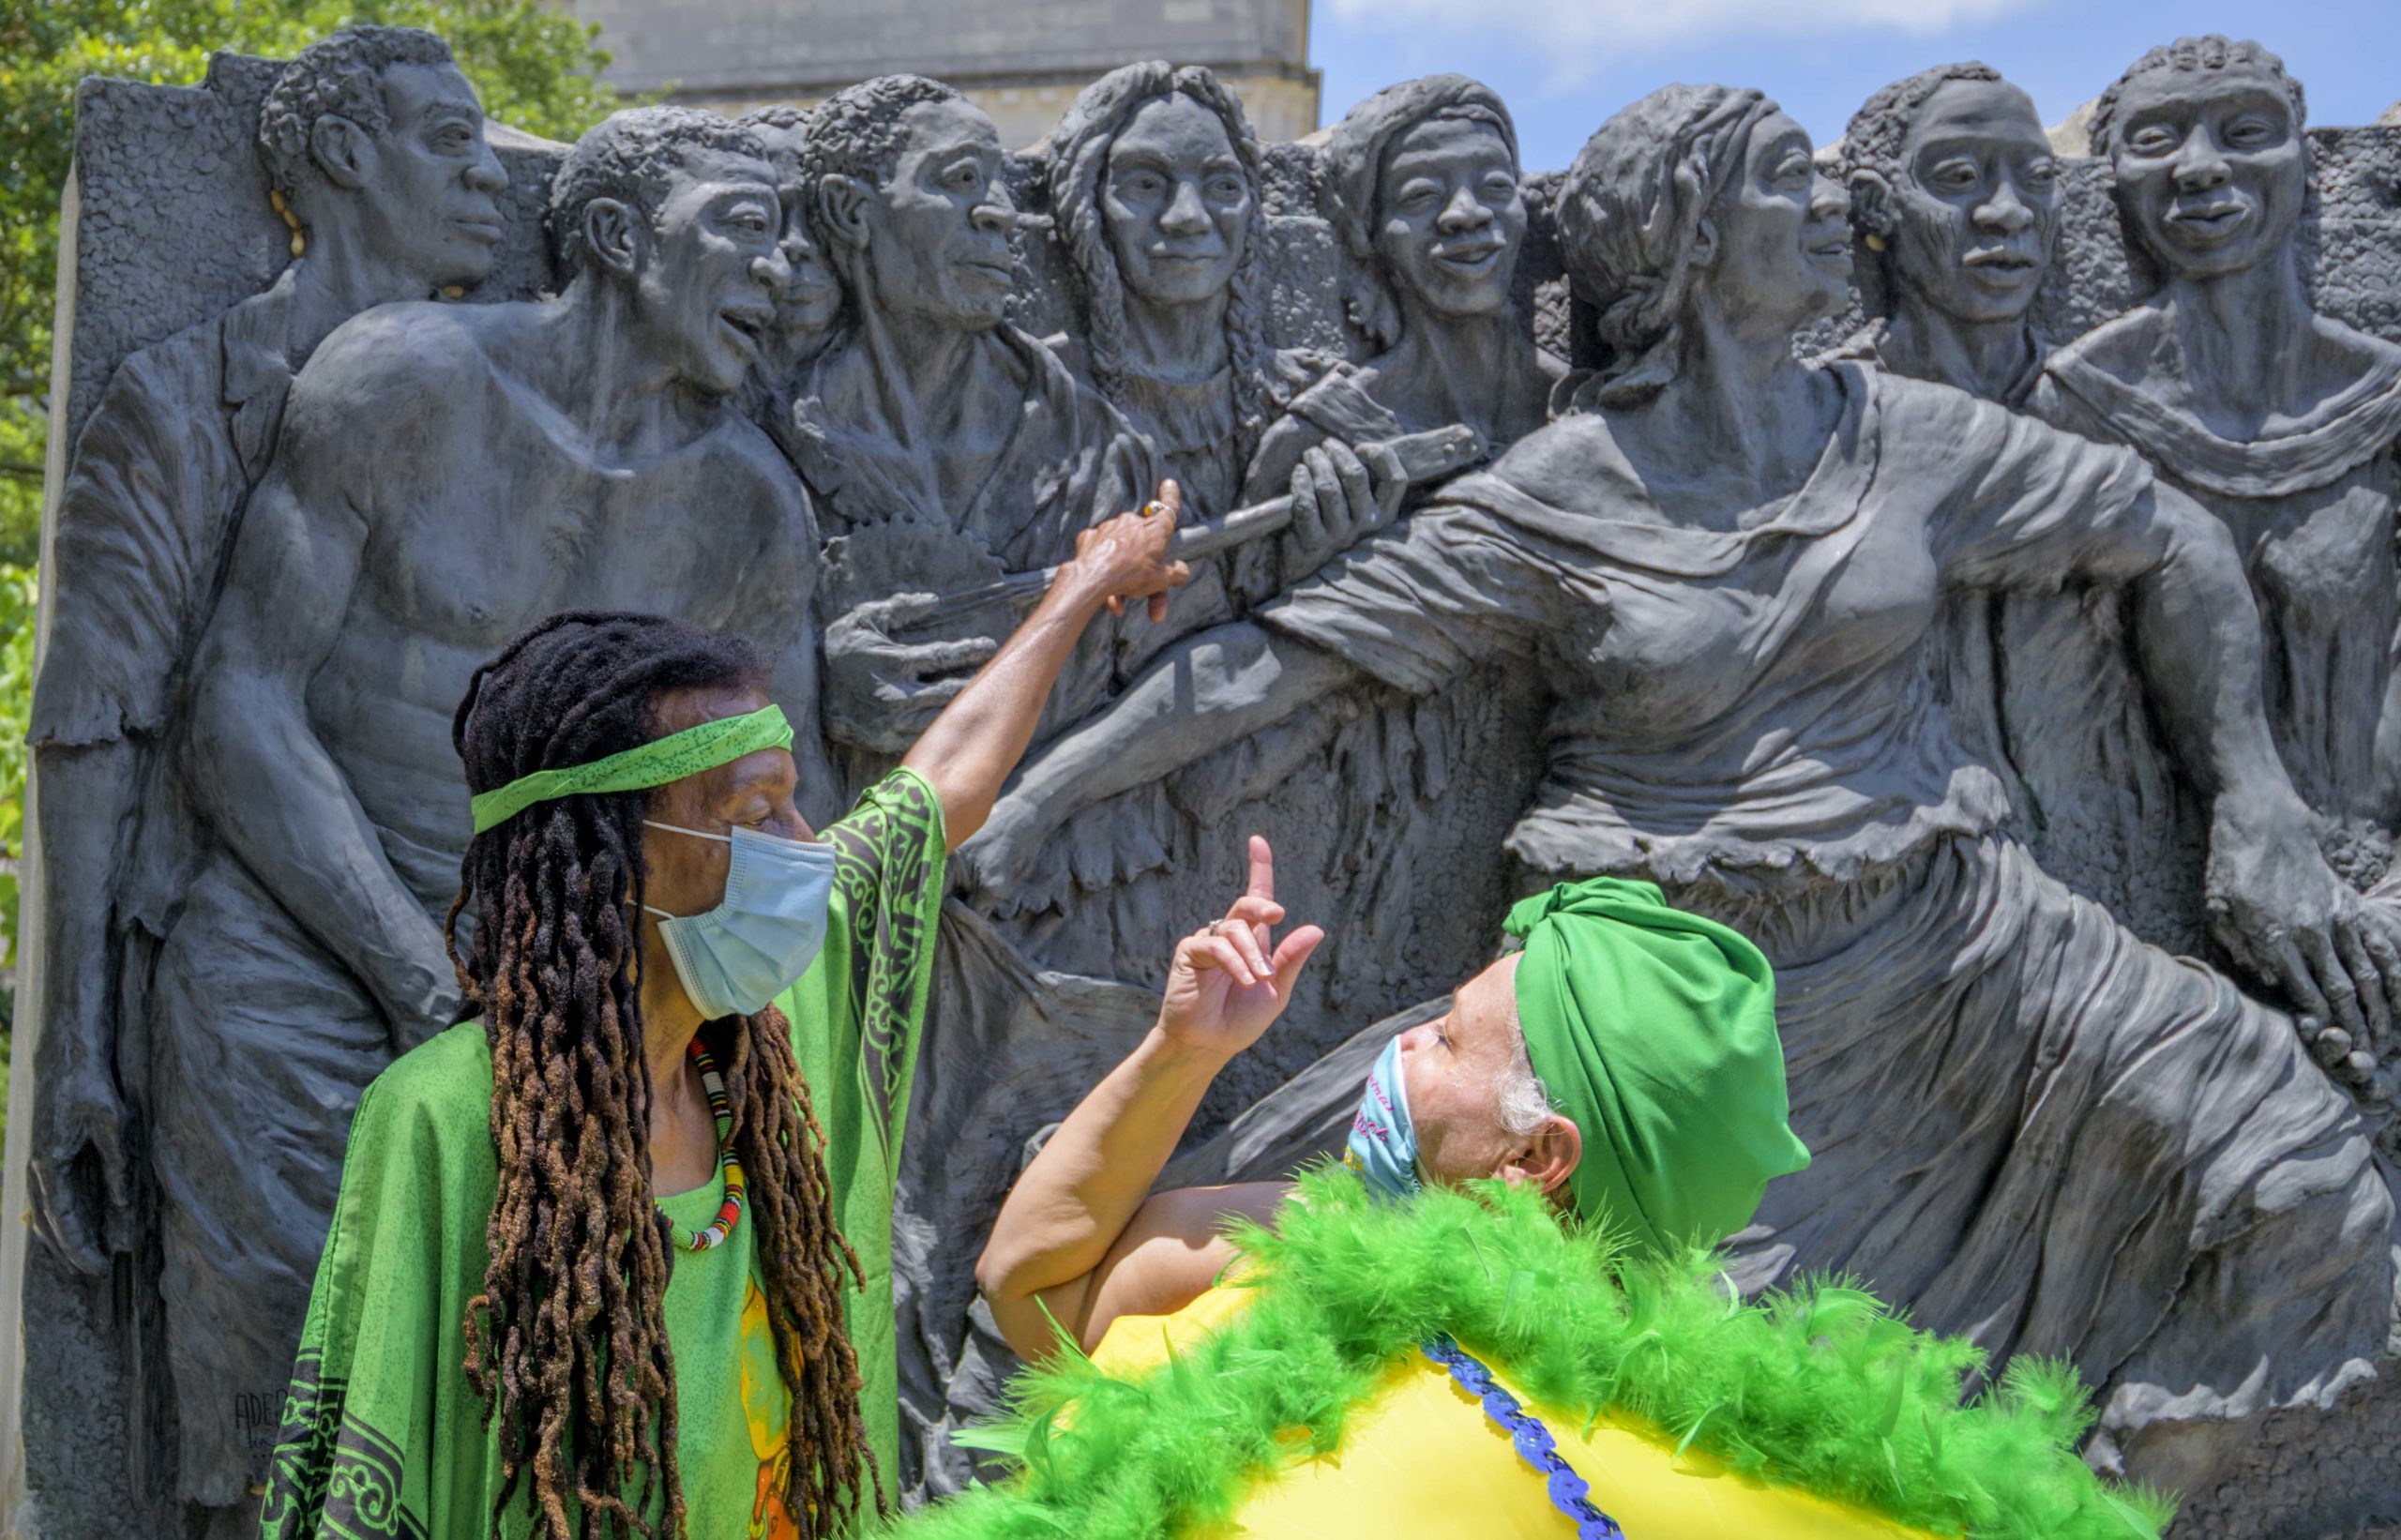 The Baby Dolls formed a prayer circle underneath the Ancestor Tree in Congo Square at Louis Armstrong Park to observe Juneteenth on Saturday June 20, 2020 in the Treme neighborhood of New Orleans. Photo by Matthew Hinton